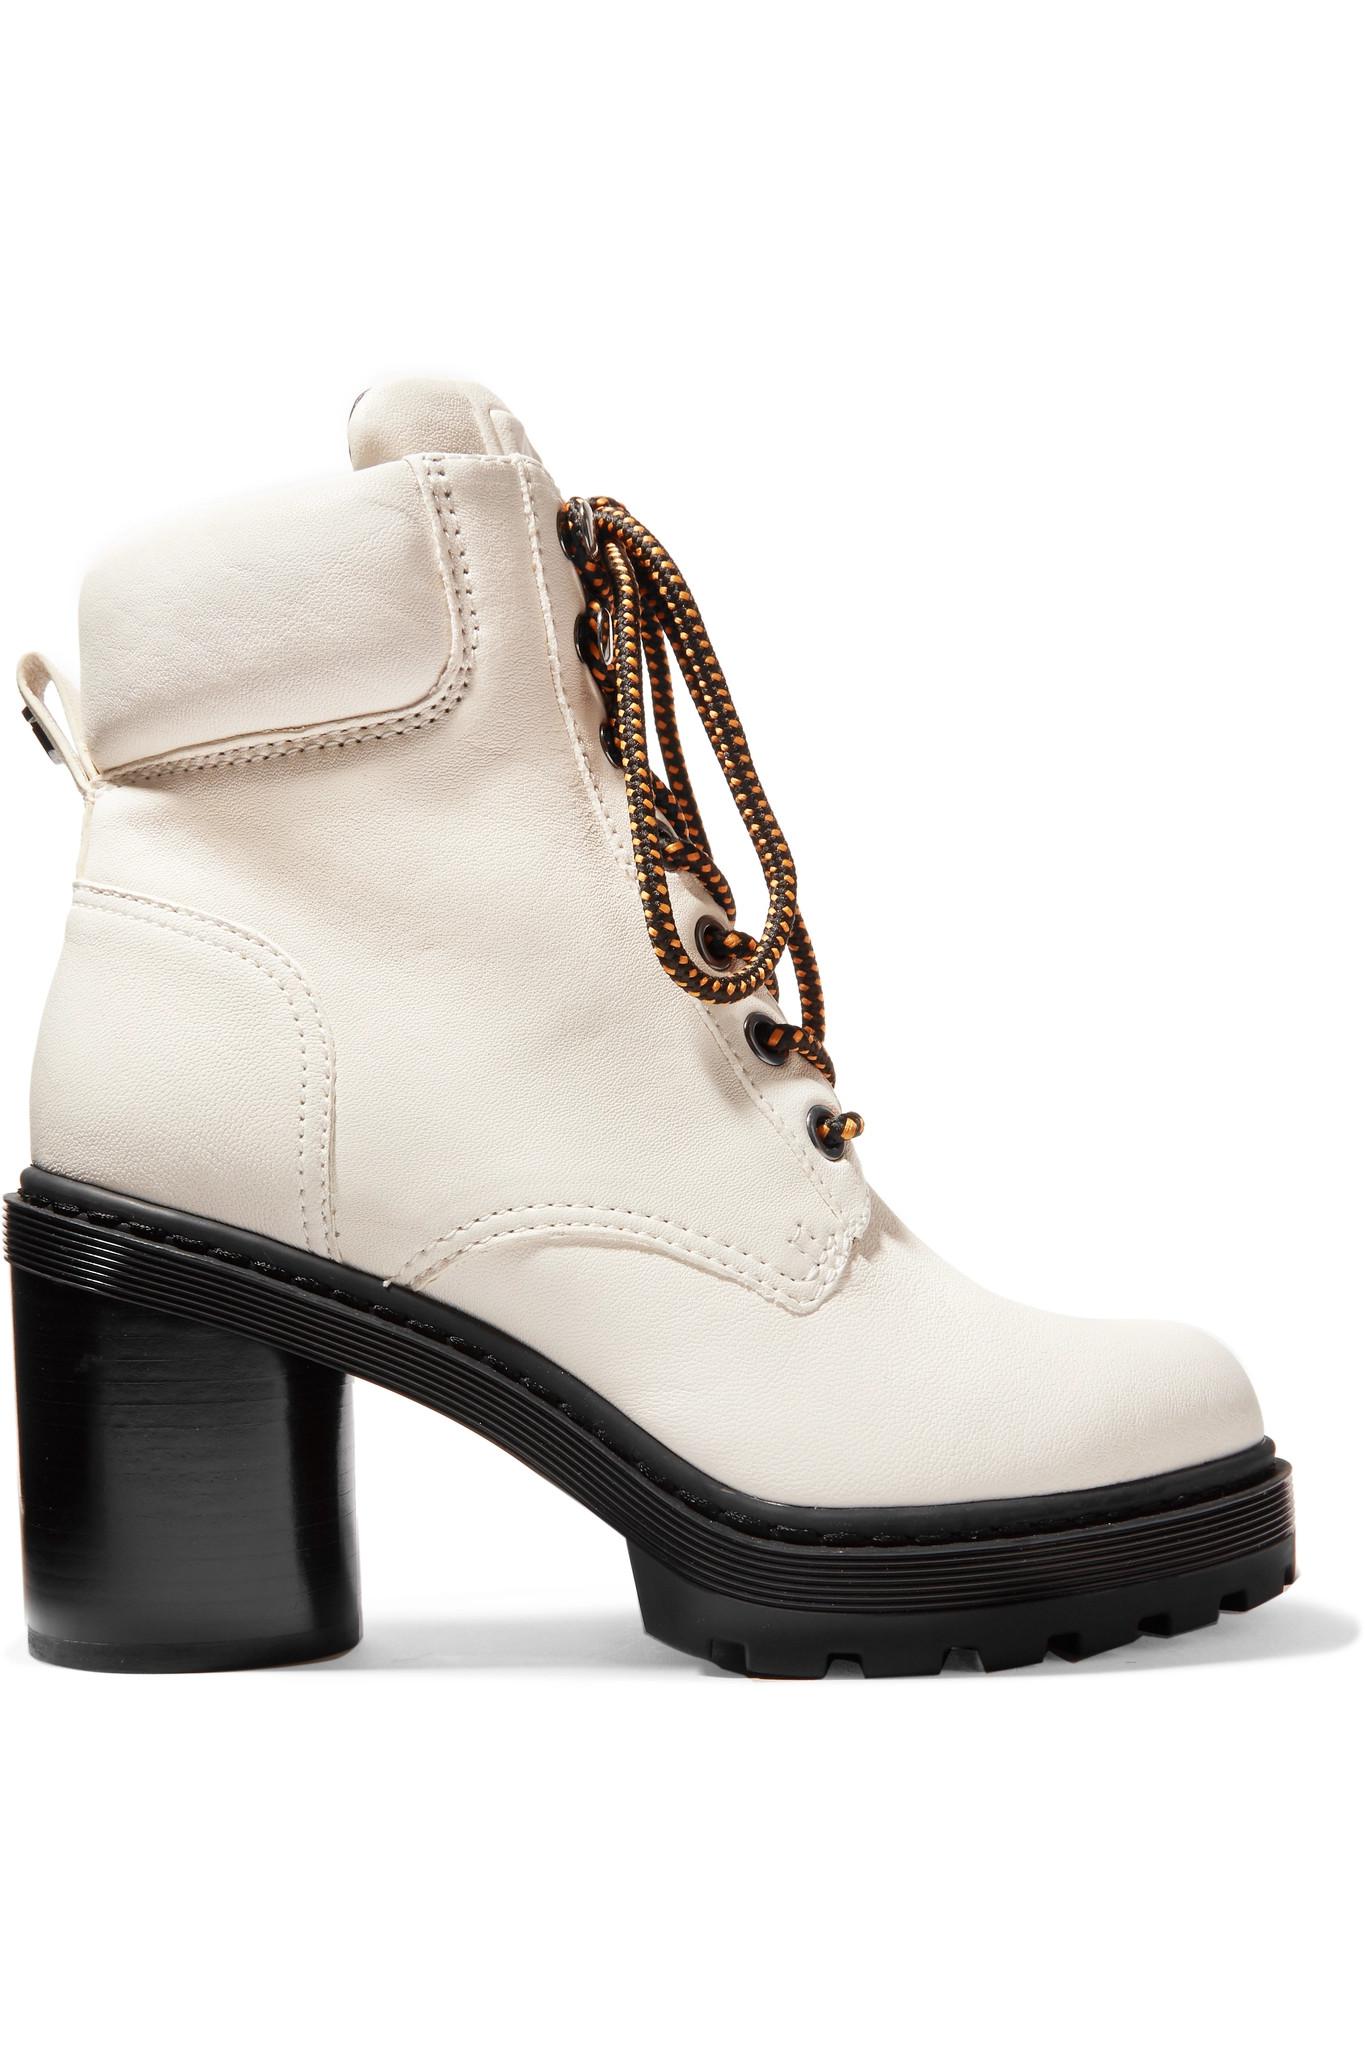 marc jacobs crosby leather hiking boots